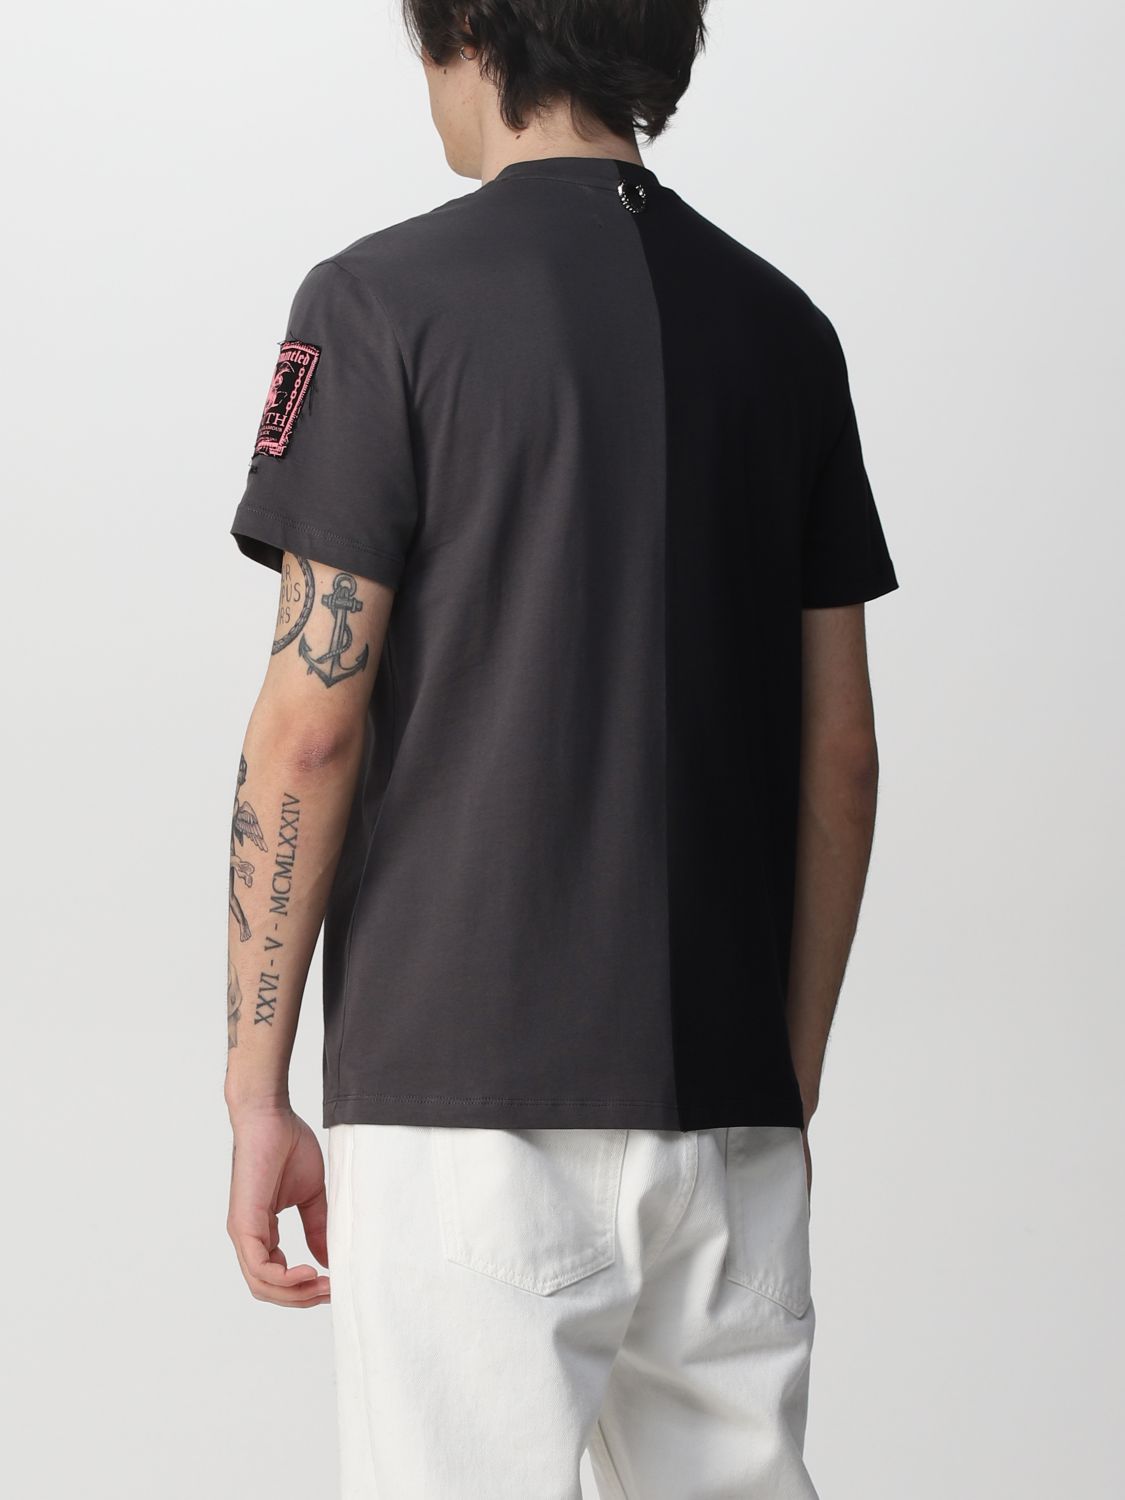 Tシャツ Fred Perry By Raf Simons: Tシャツ Fred Perry By Raf Simons メンズ グレー 2